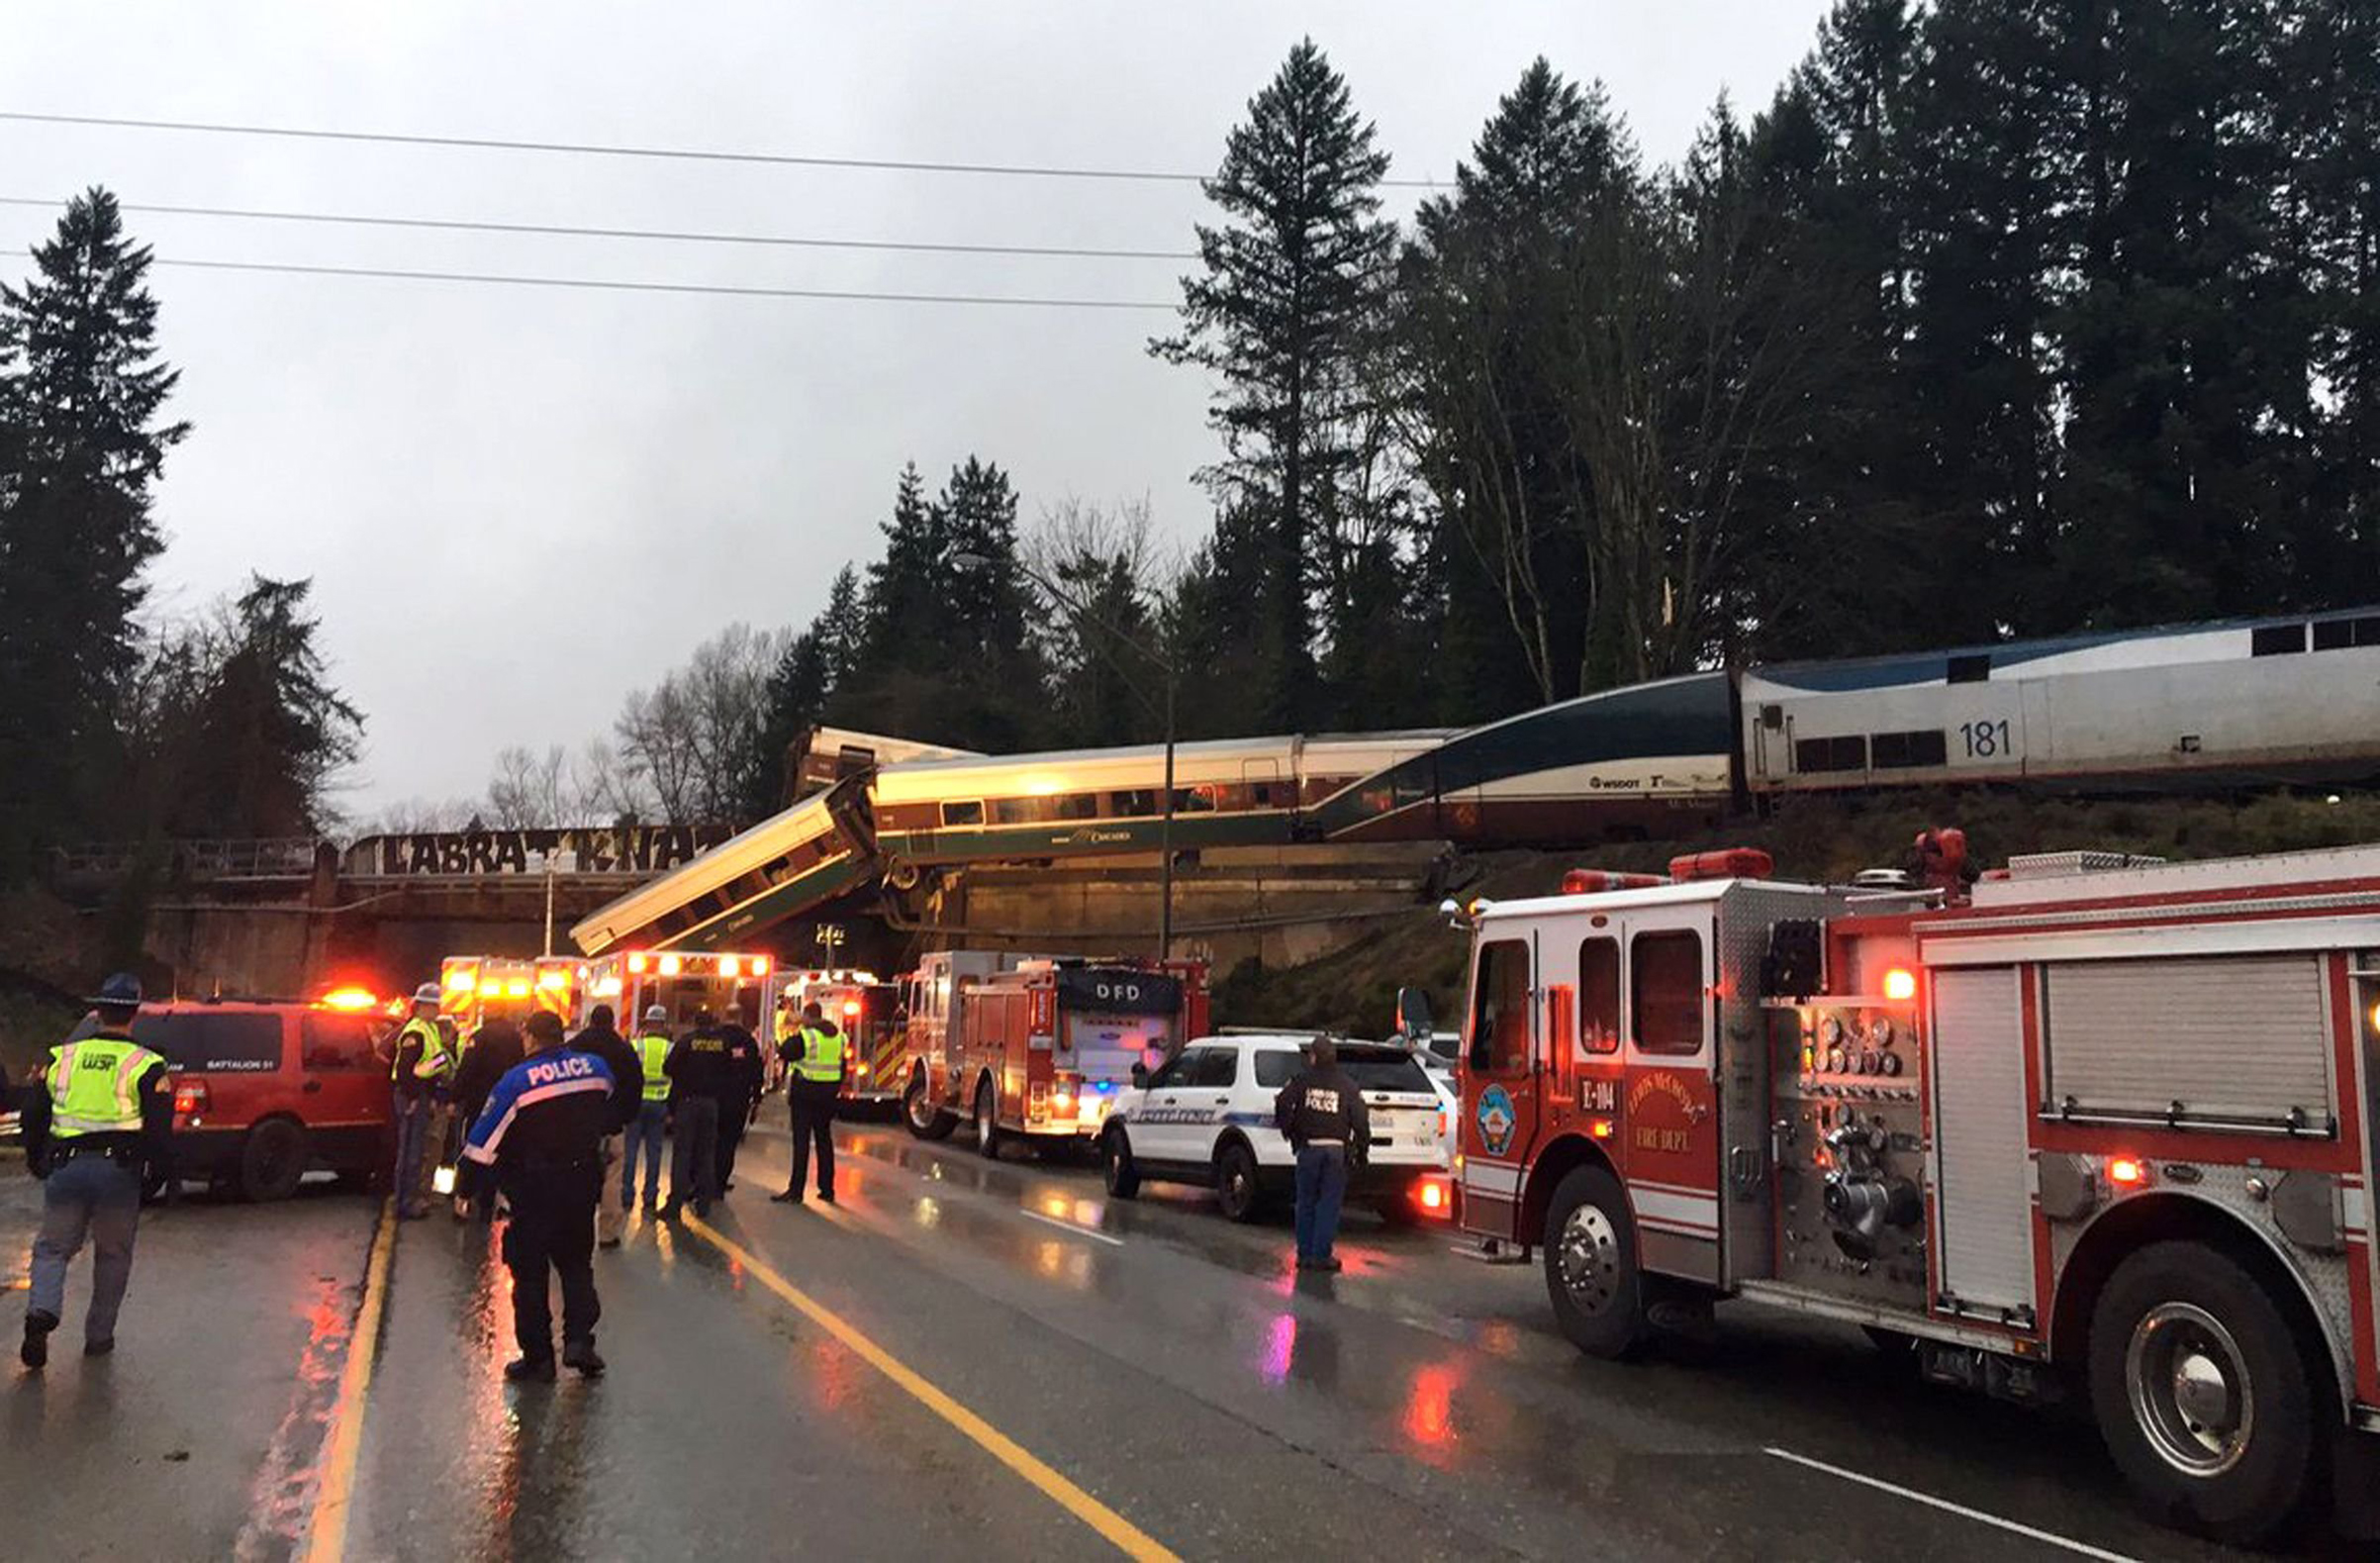 An Amtrak train that was derailed south of Seattle on Dec. 18, 2017. Authorities reported "injuries and casualties." The train derailed about 40 miles (64 kilometers) south of Seattle before 8 a.m., spilling at least one train car on to busy Interstate 5. (Washington State Patrol/AP/Shutterstock)